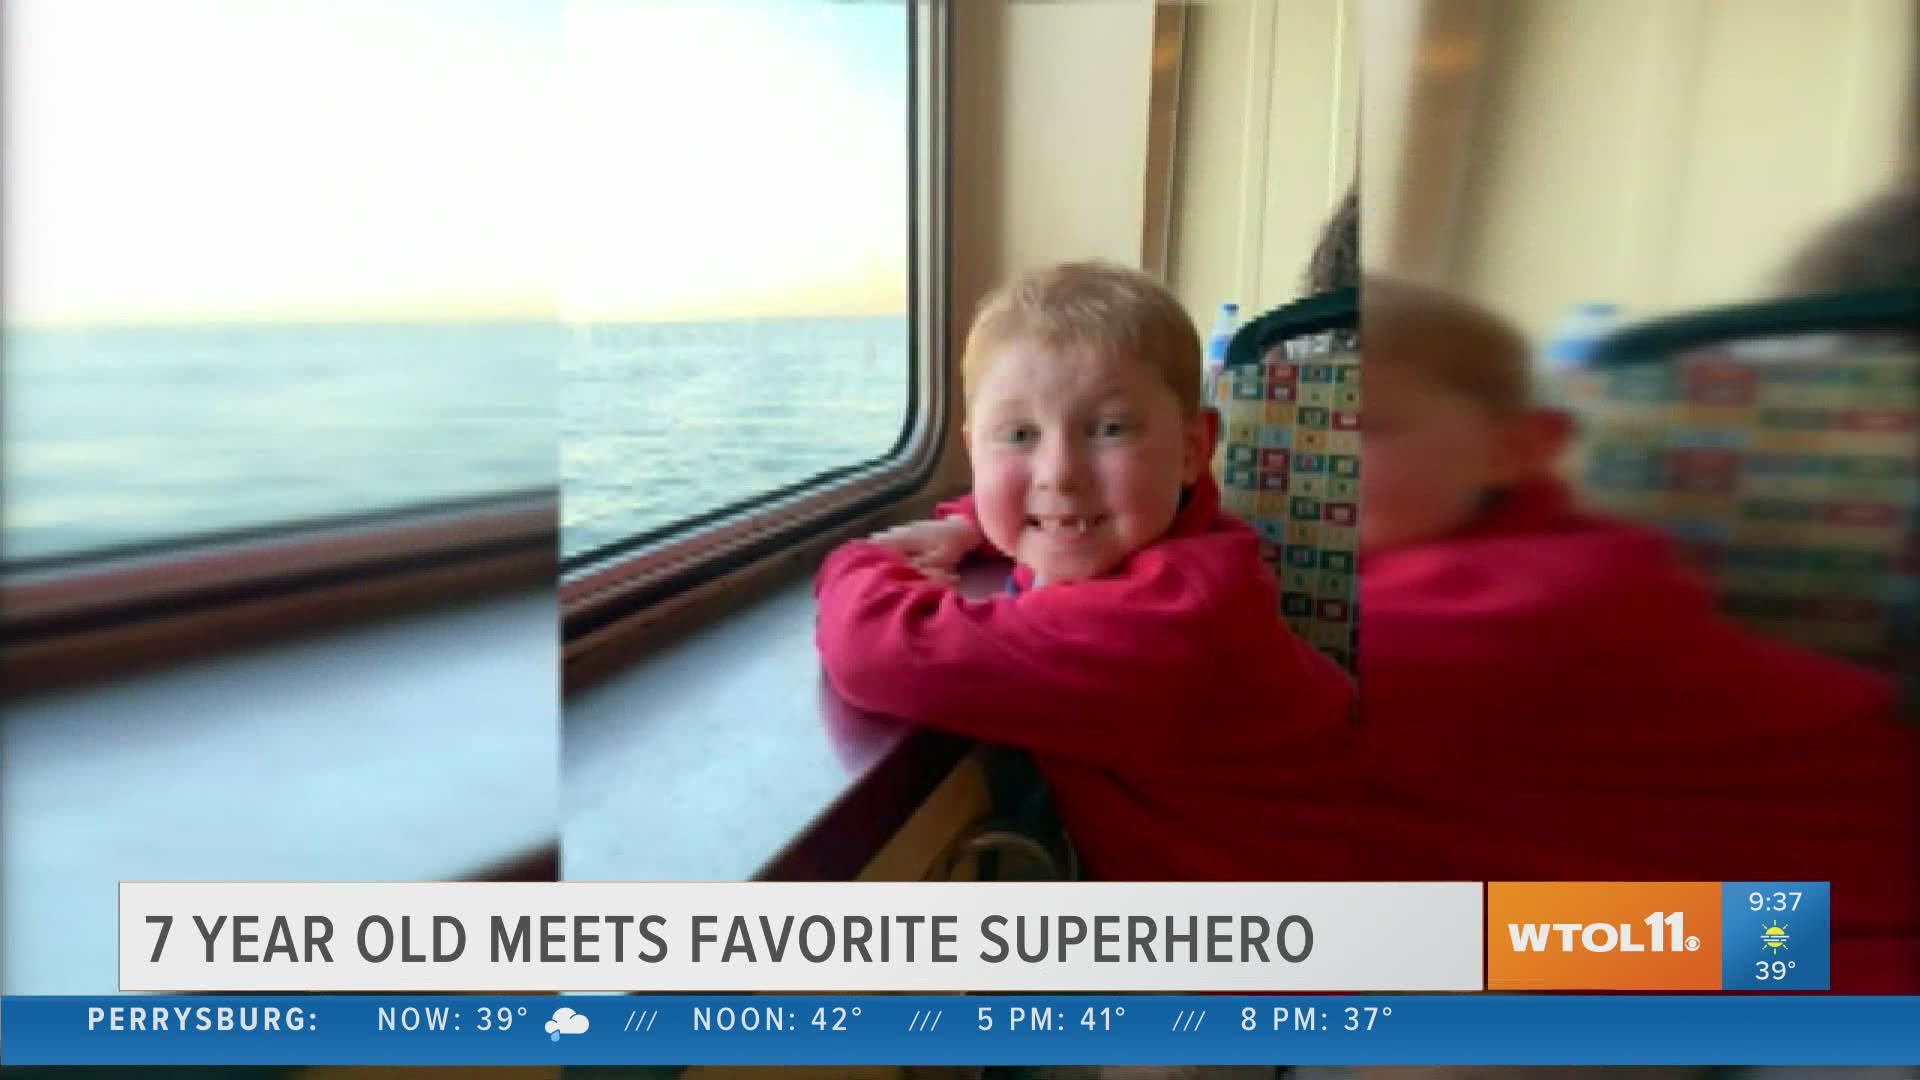 This 7-year-old battling cancer got to meet his favorite superhero: Aquaman, played by actor Jason Mamoa!